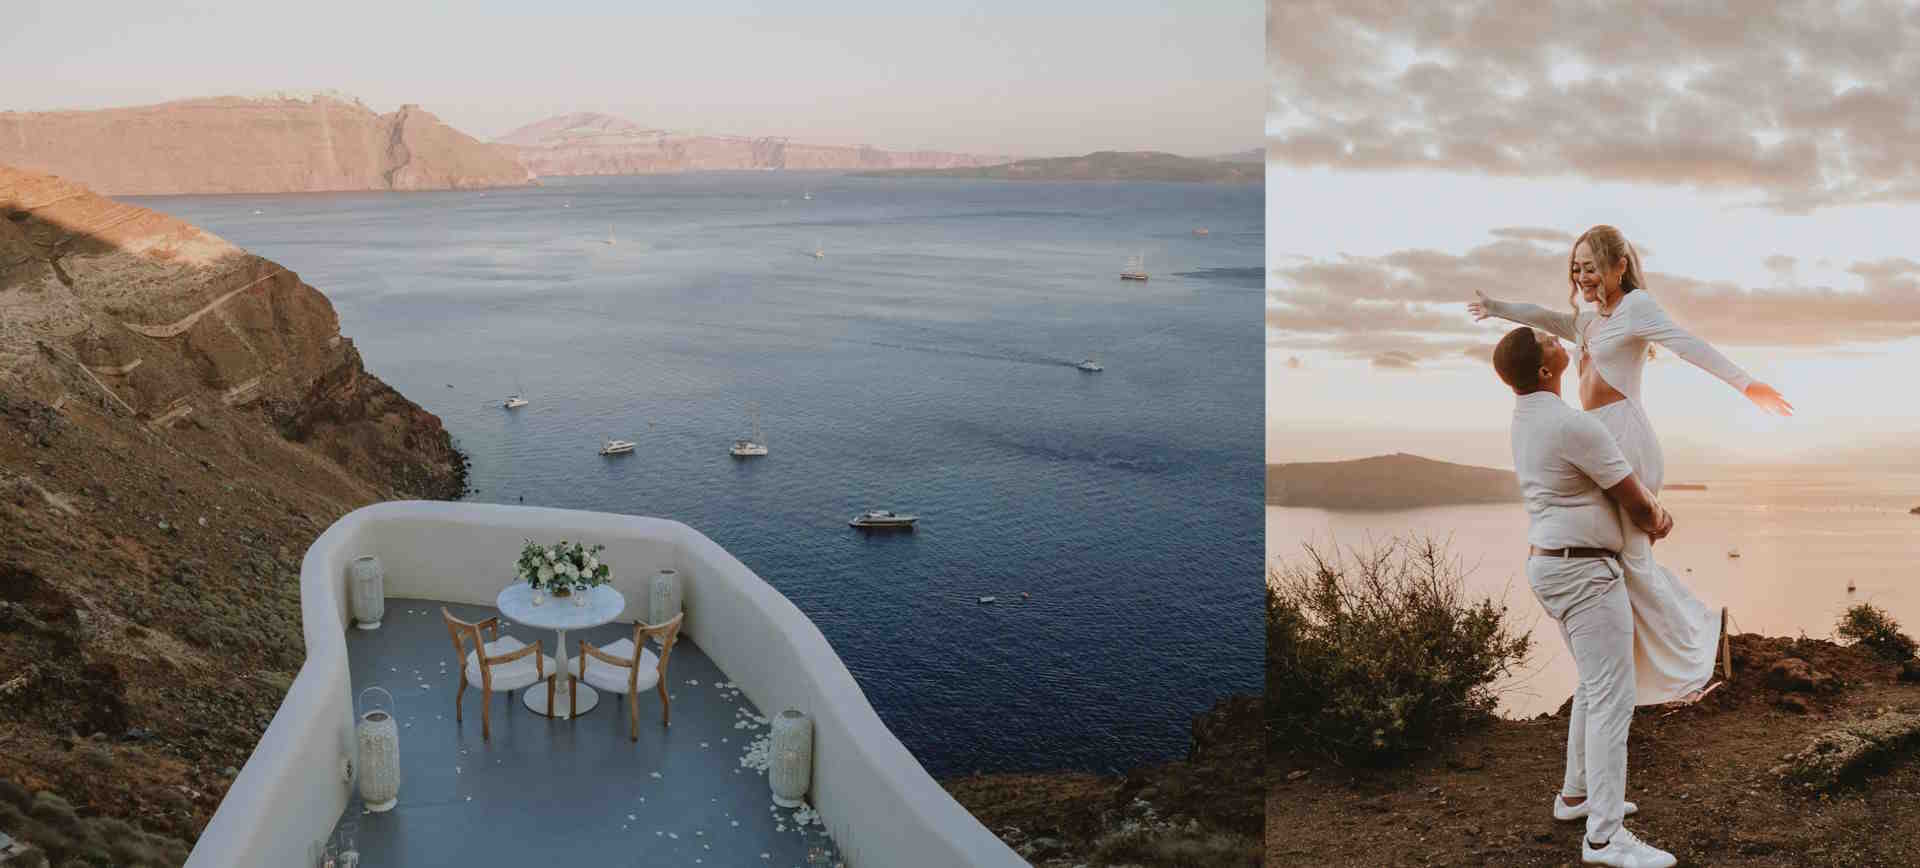 Santorini Love Escape Adventure Wedding Package with Cliffside Ceremony Dinner in Greece